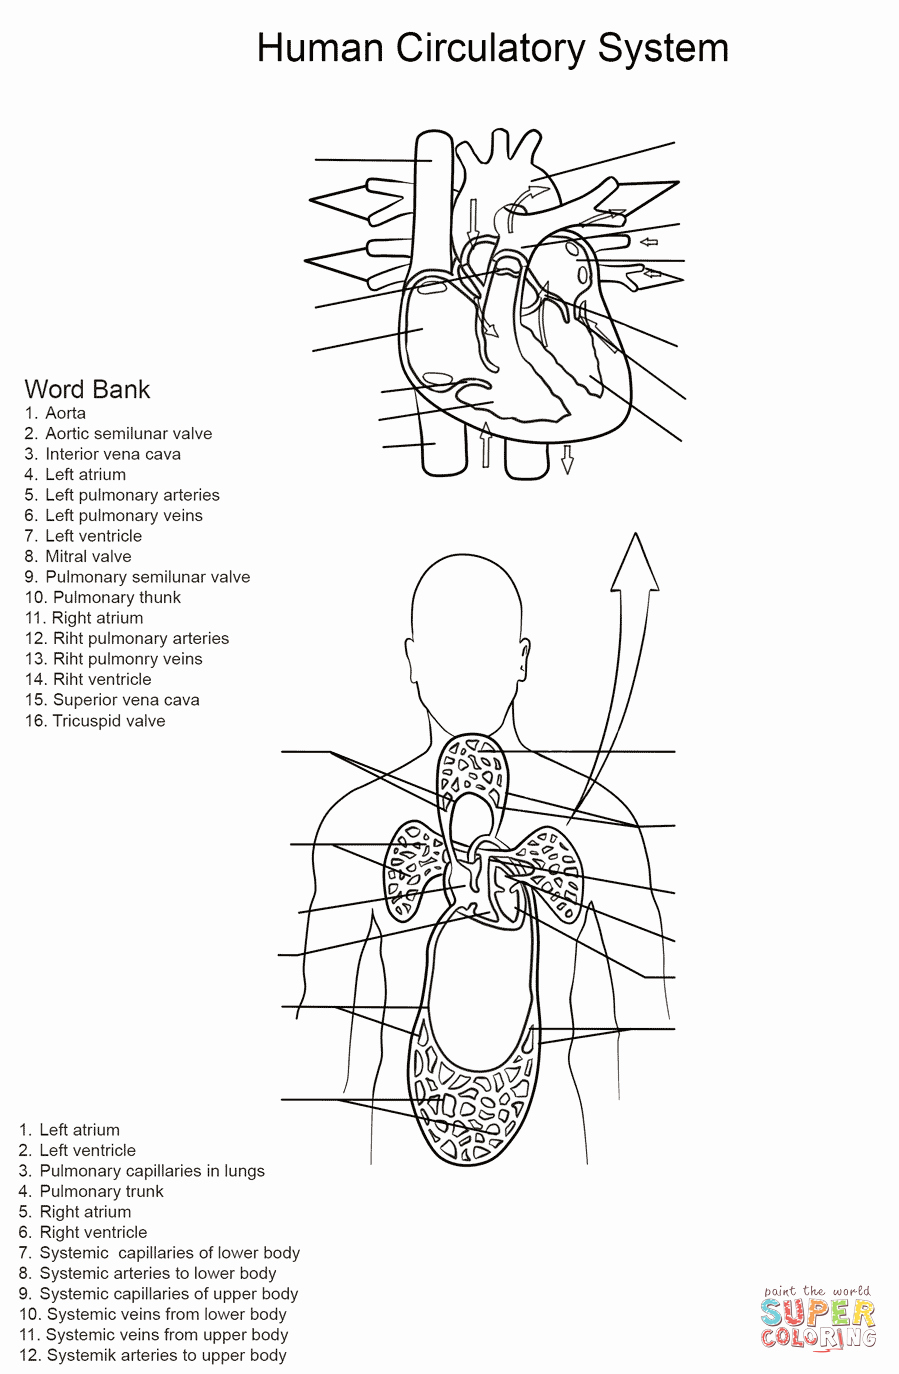 The Cardiovascular System Worksheet Lovely Human Circulatory System Worksheet Coloring Page